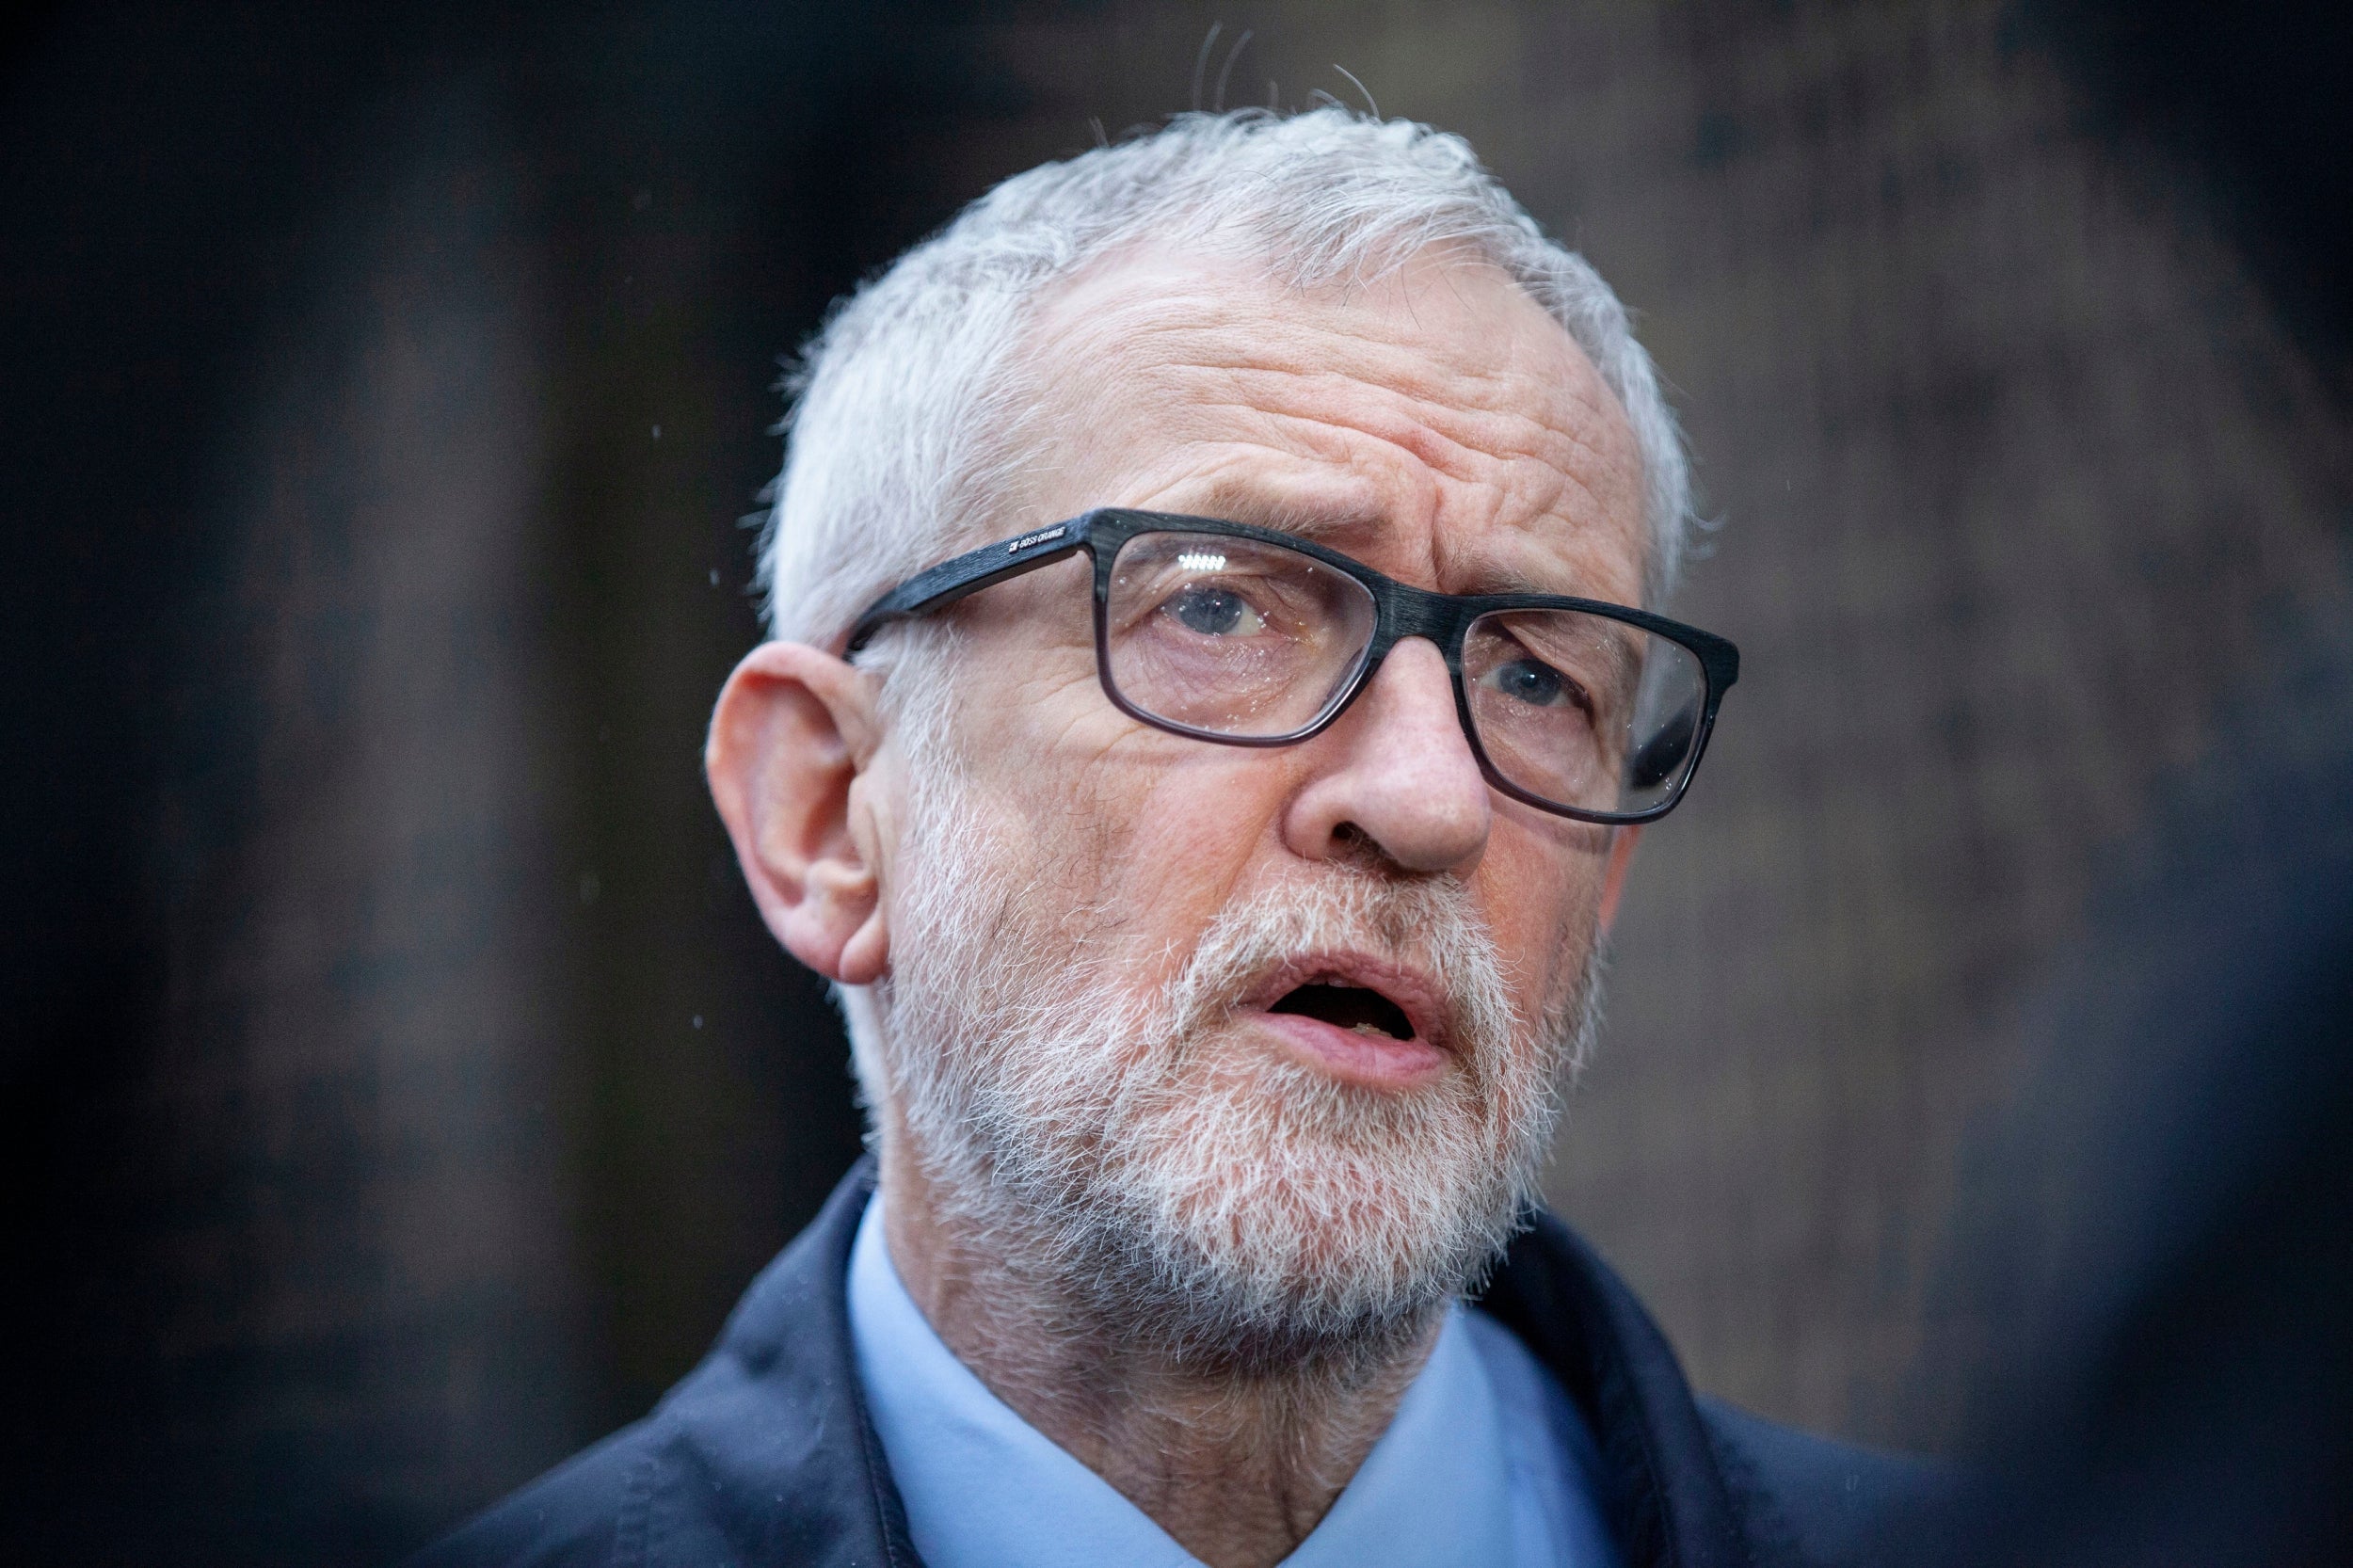 Public dislike for Jeremy Corbyn played 'significant' role in Labour's historic election defeat, independent post mortem finds